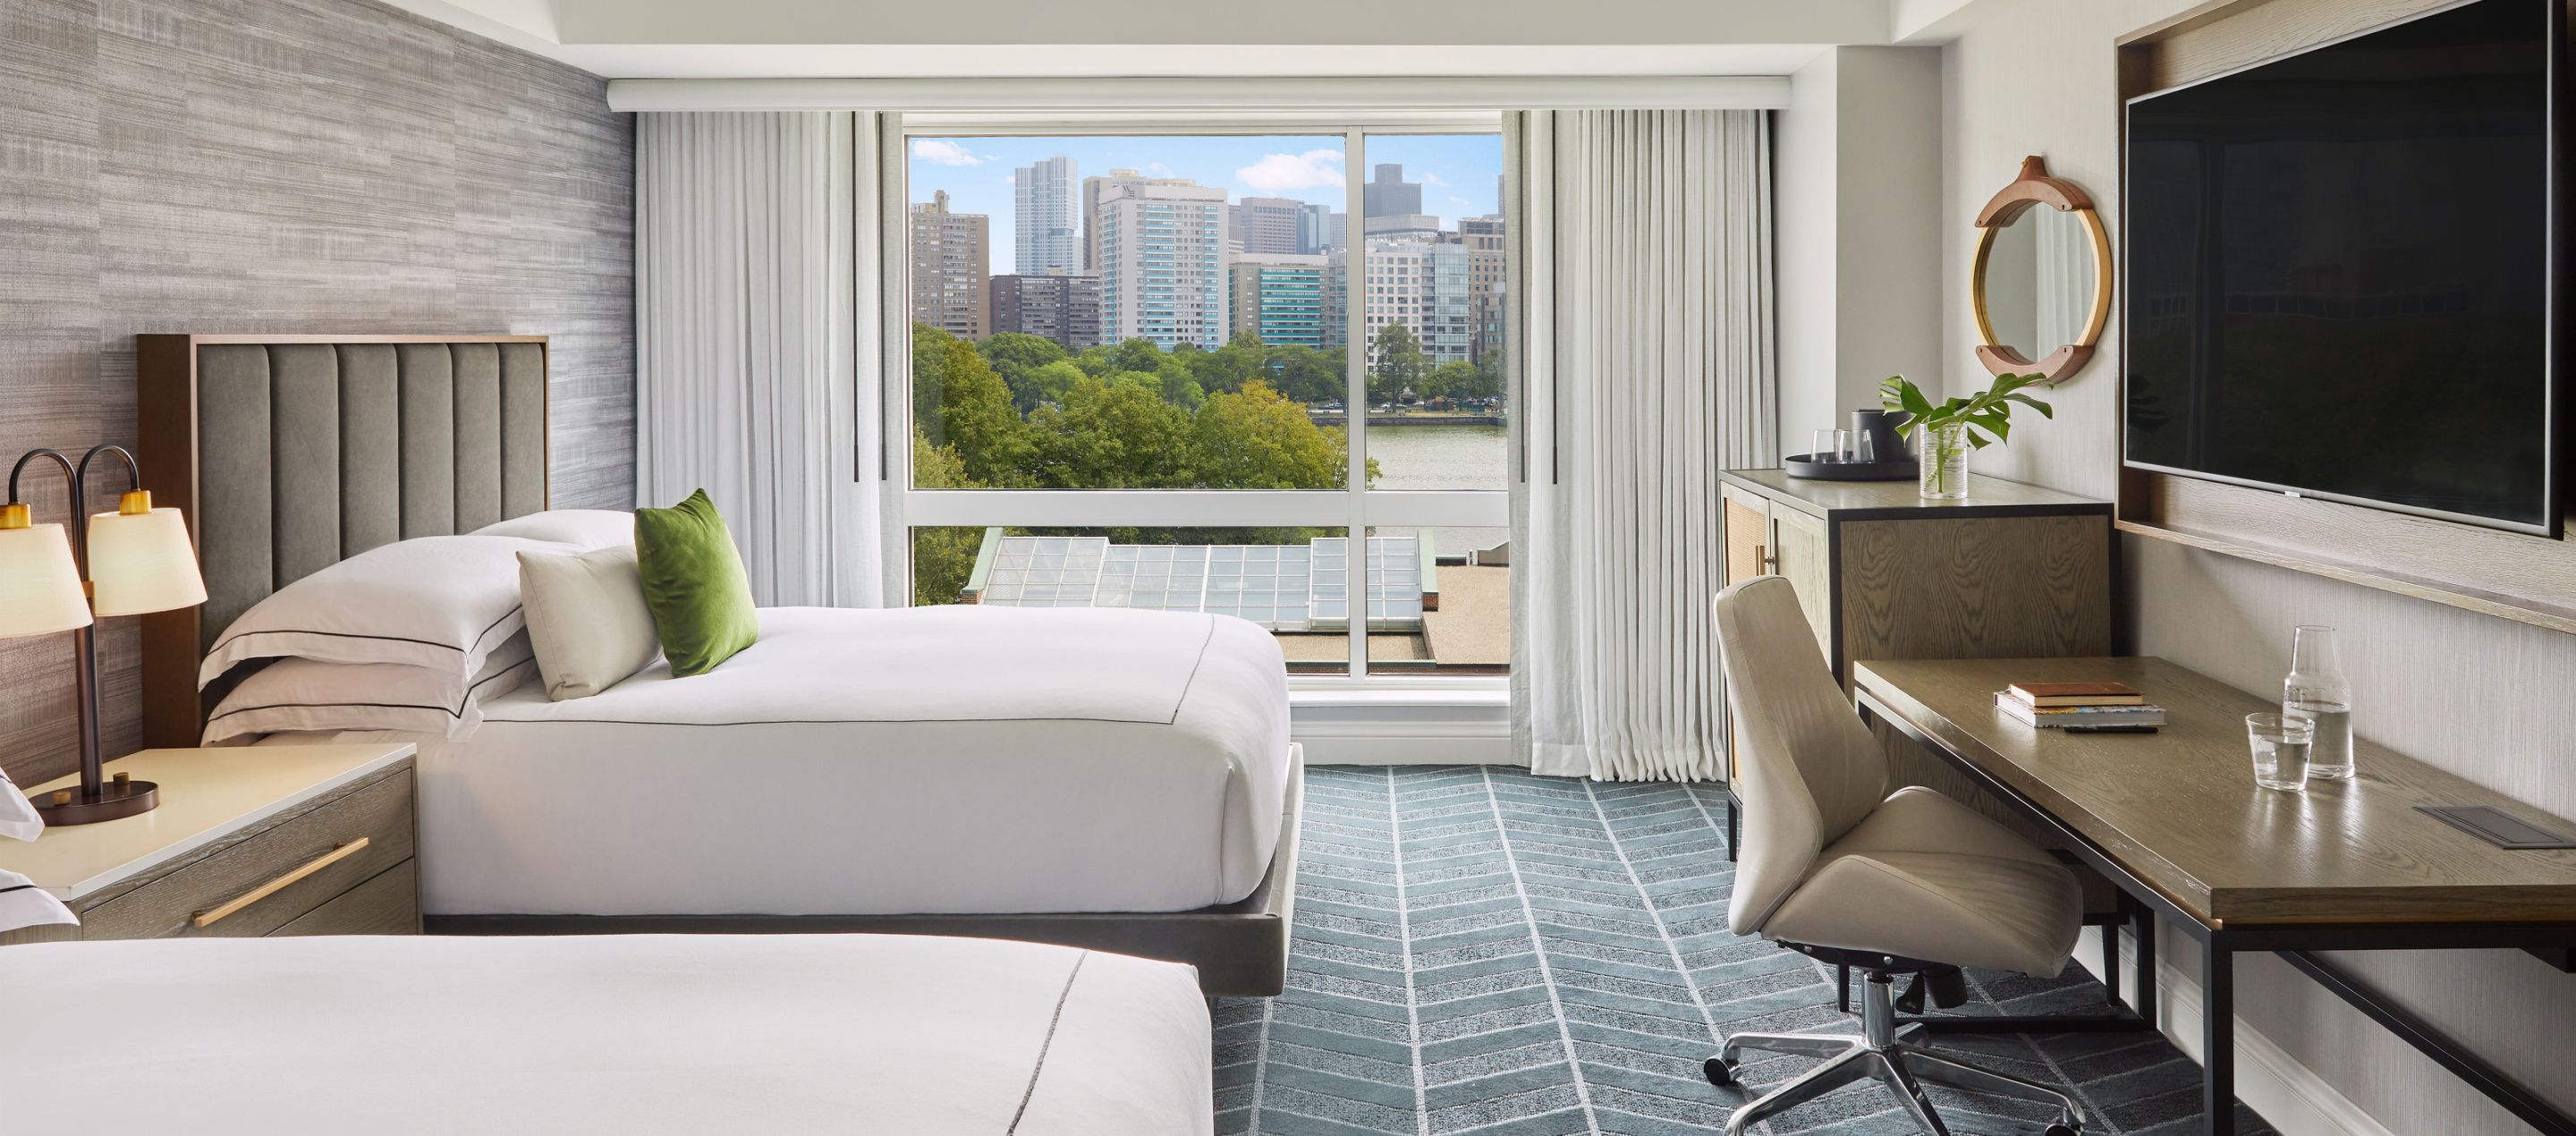 urban guestroom with floor to ceiling windows and city views